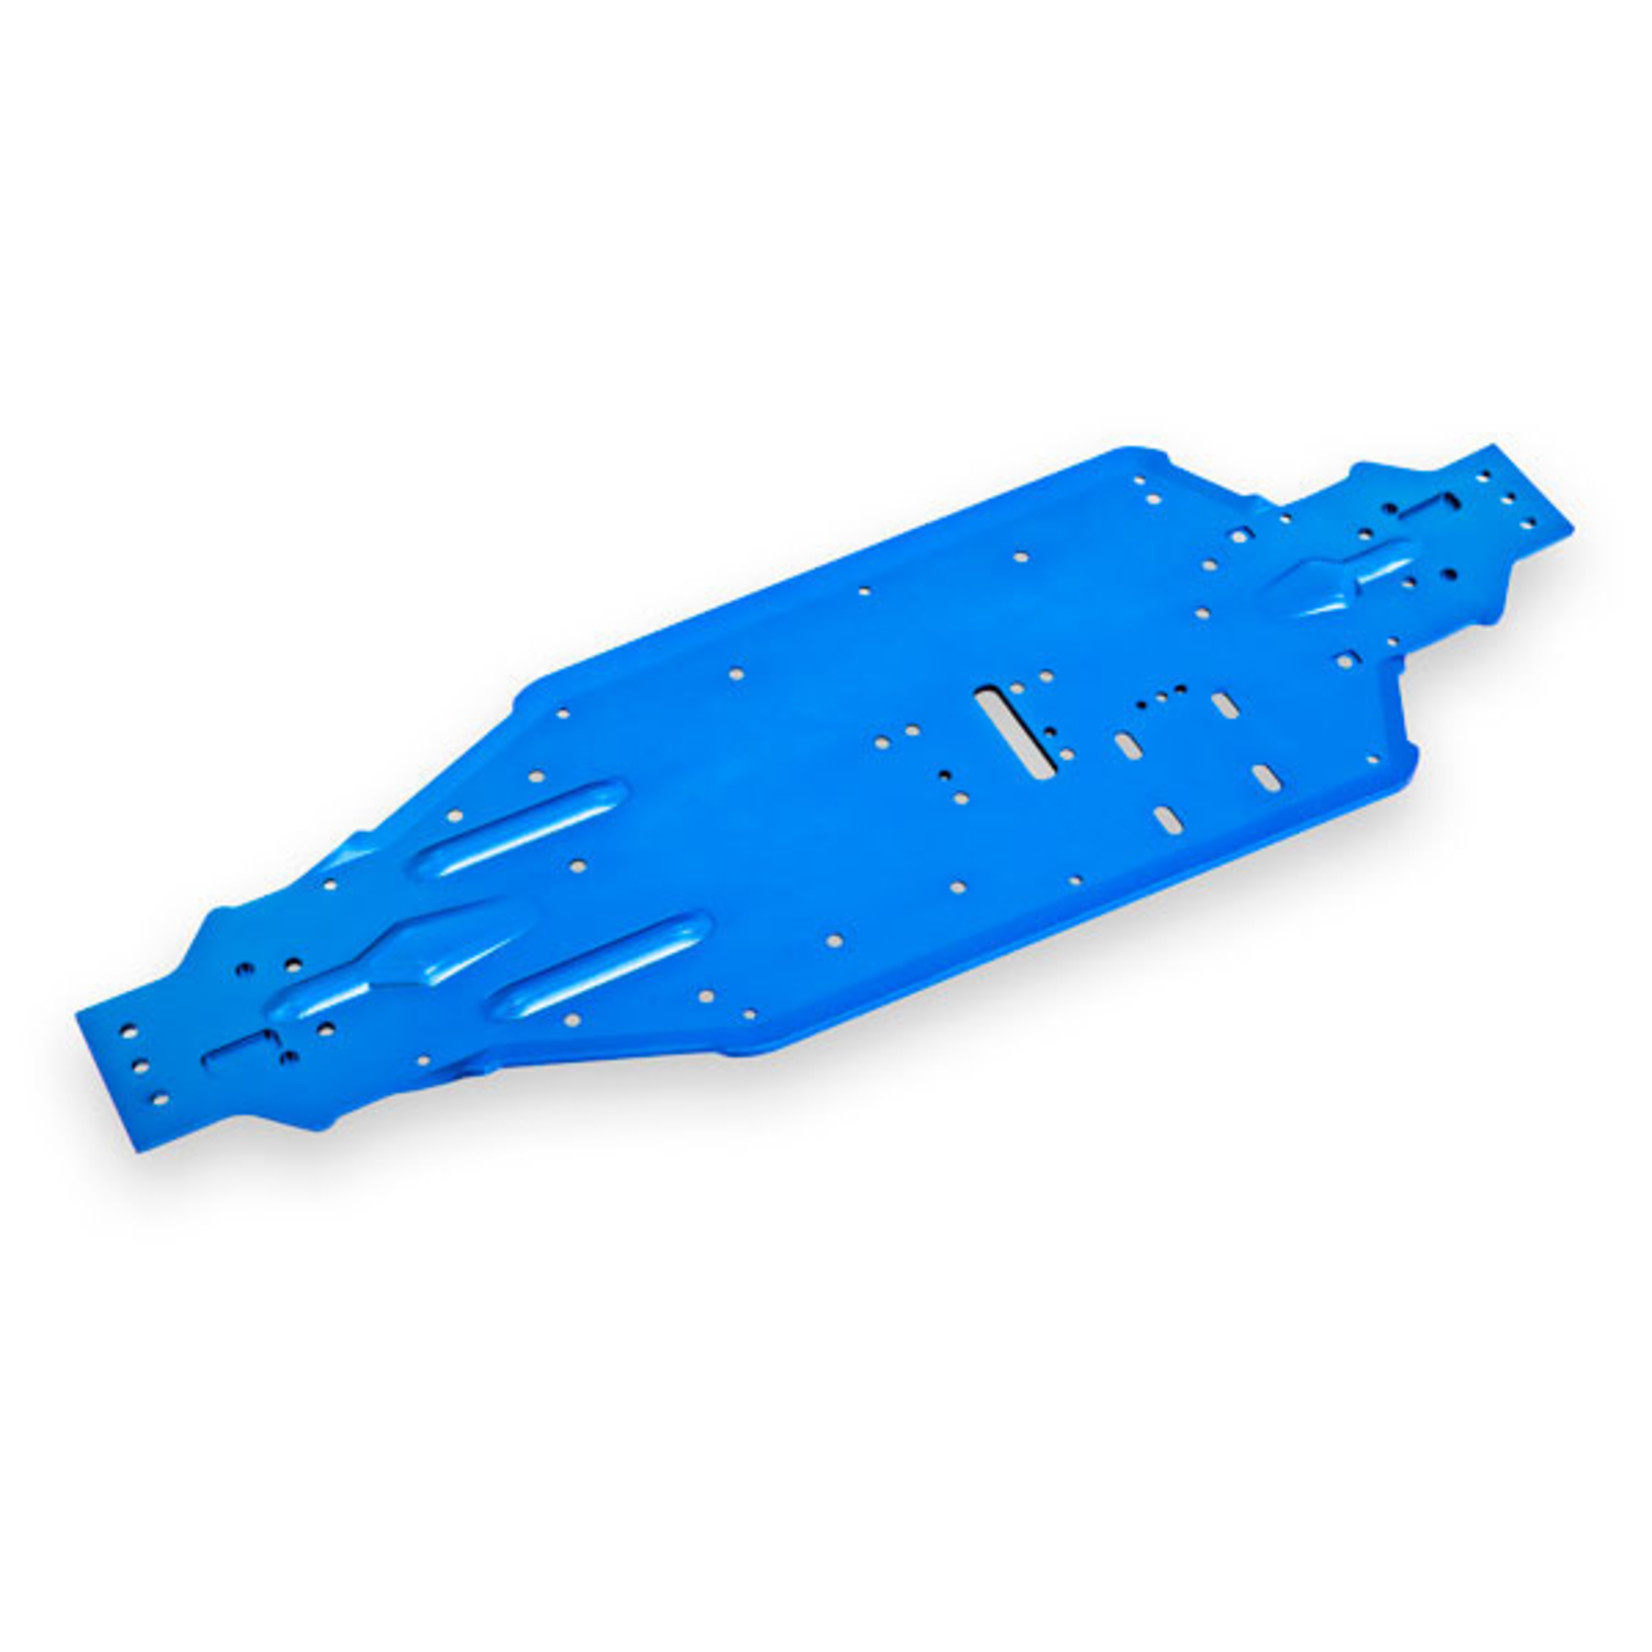 Traxxas 9522 - Chassis, aluminum (blue-anodized)